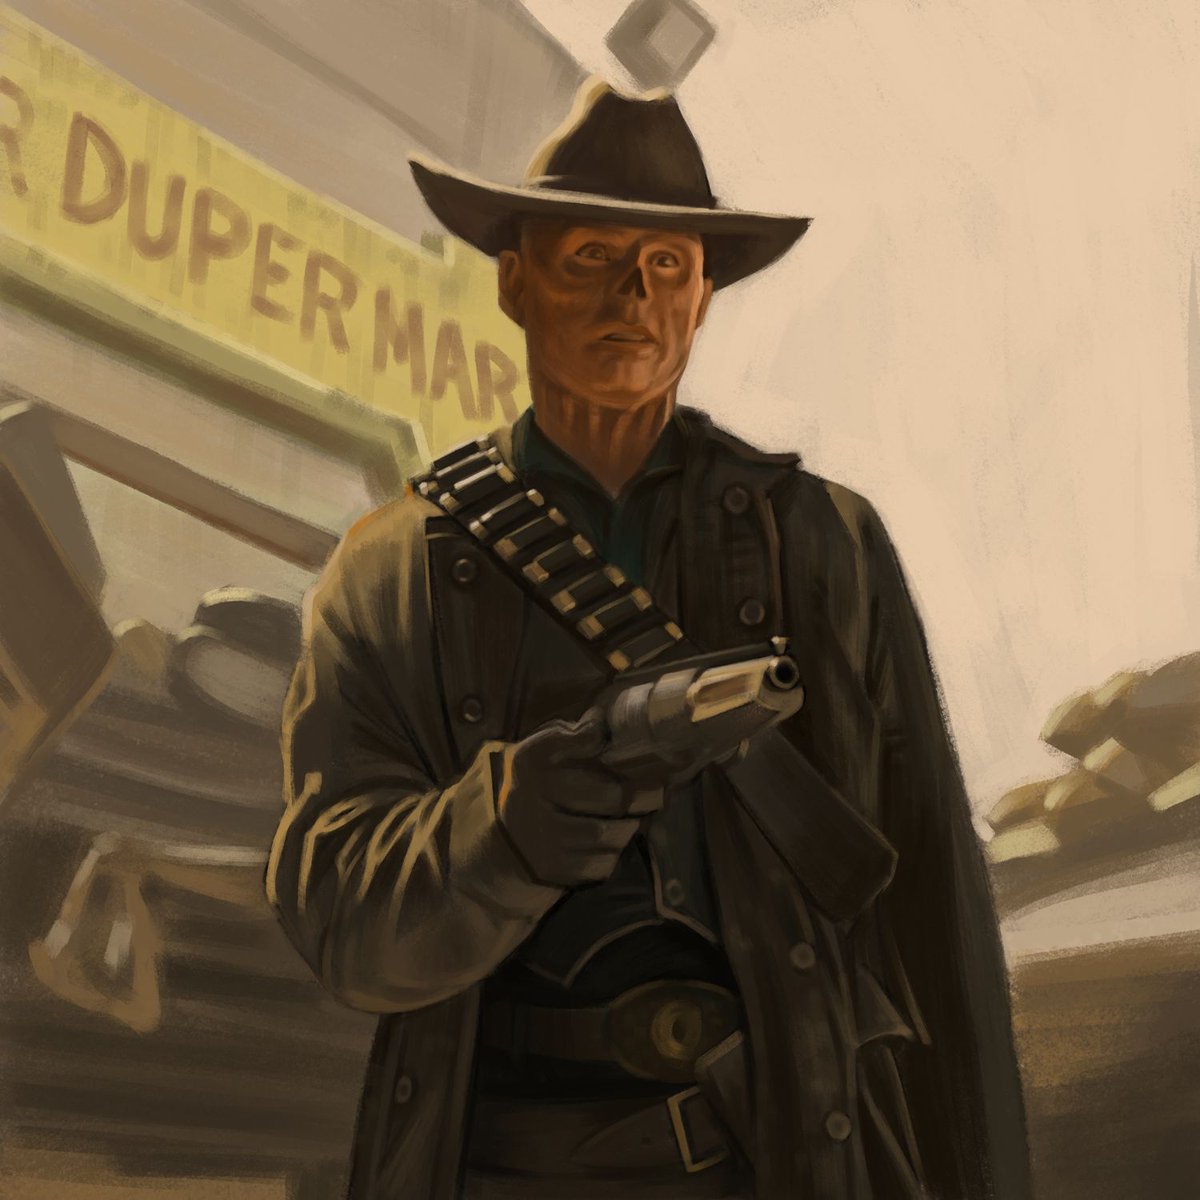 Another Fallout scene study. Obsessed with the Ghoul.
#Fallout #FalloutPrime #cooperhoward #waltongoggins
#theghoul